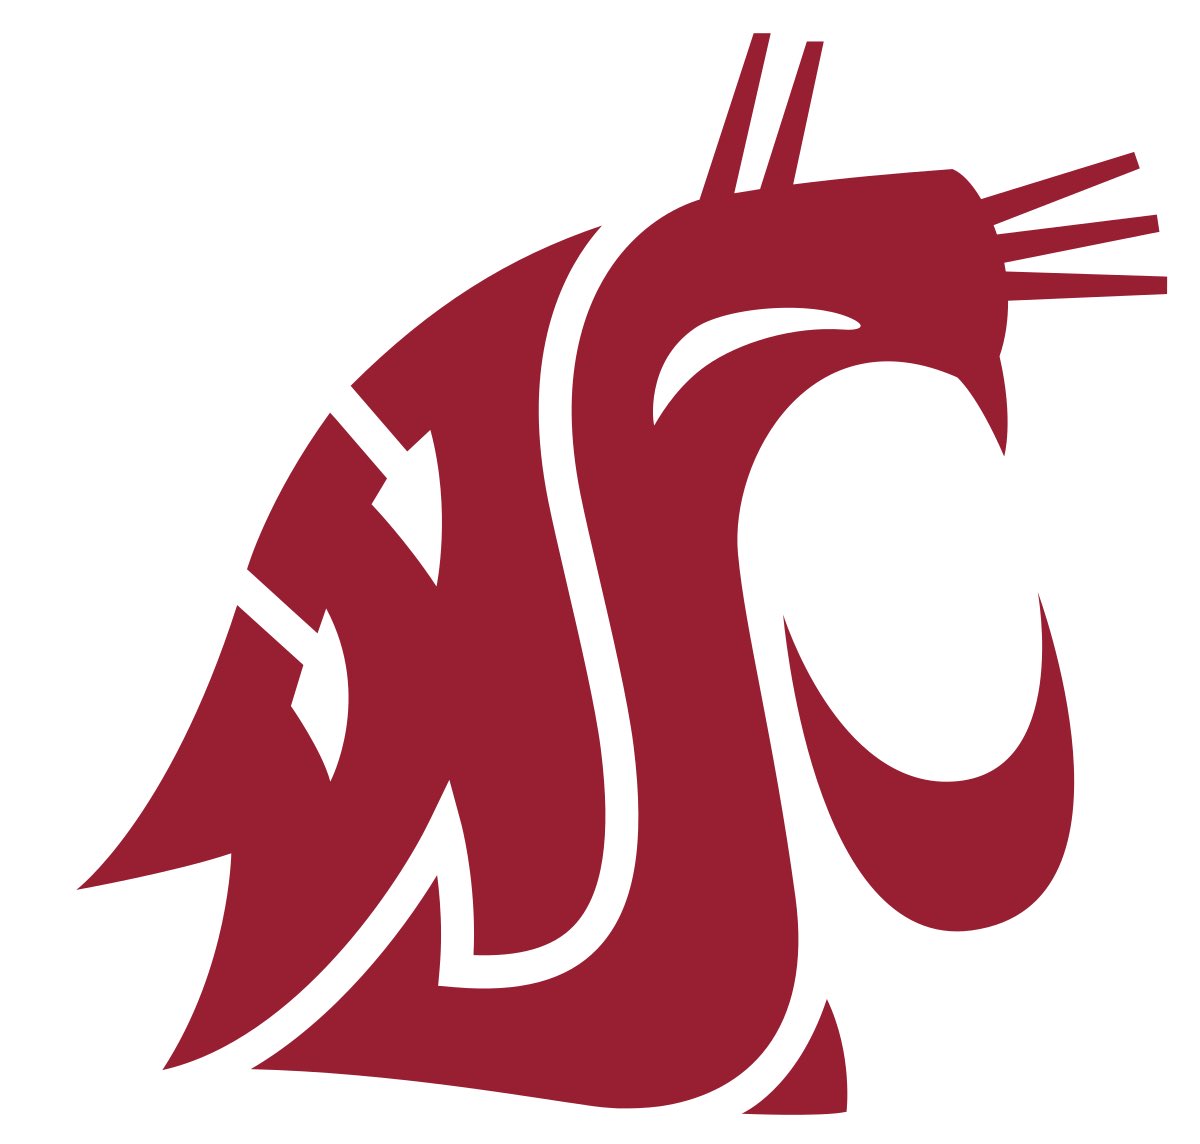 ‼️SCHOOL ANNOUNCEMENT‼️ Excited to announce the staff from @WSUCougarFB will be in attendance at NW Best!